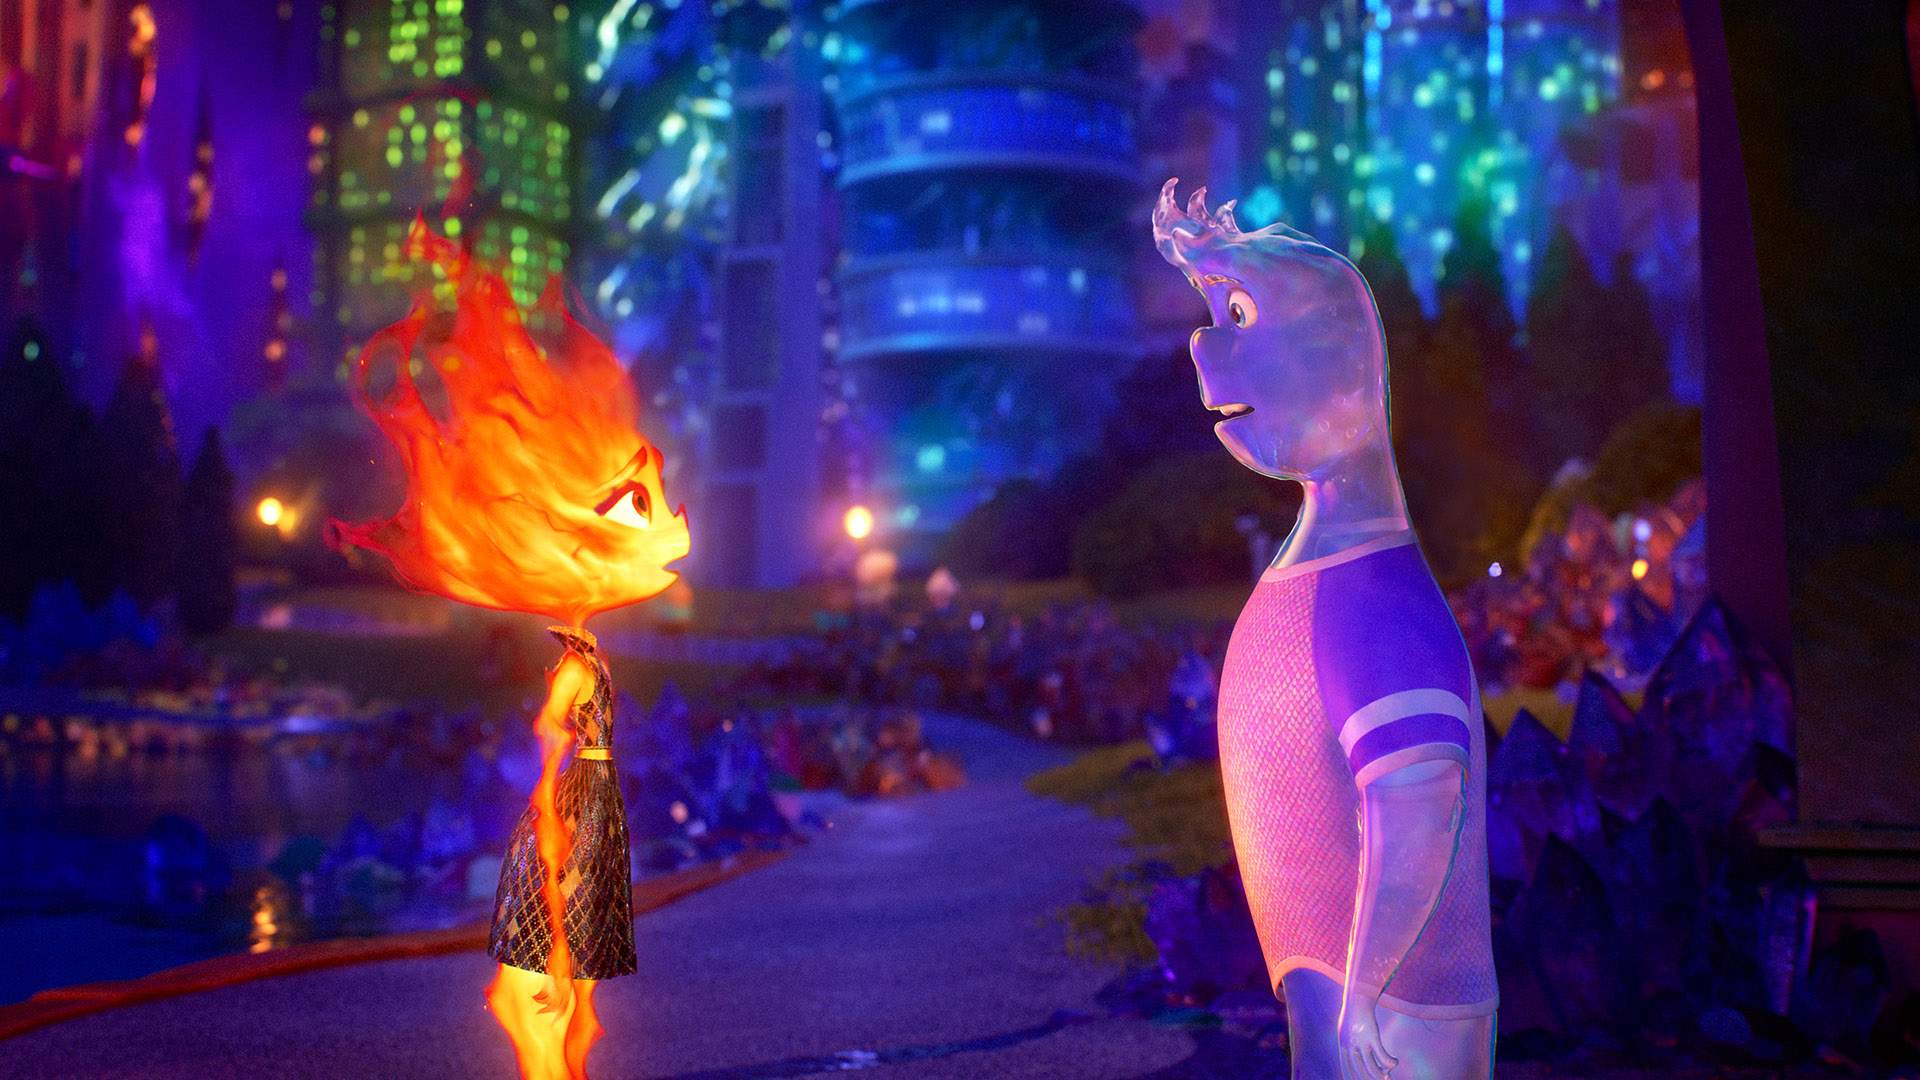 The Gorgeous Full Trailer for Pixar's 'Elemental' Goes All 'Romeo and Juliet' with Fire and Water